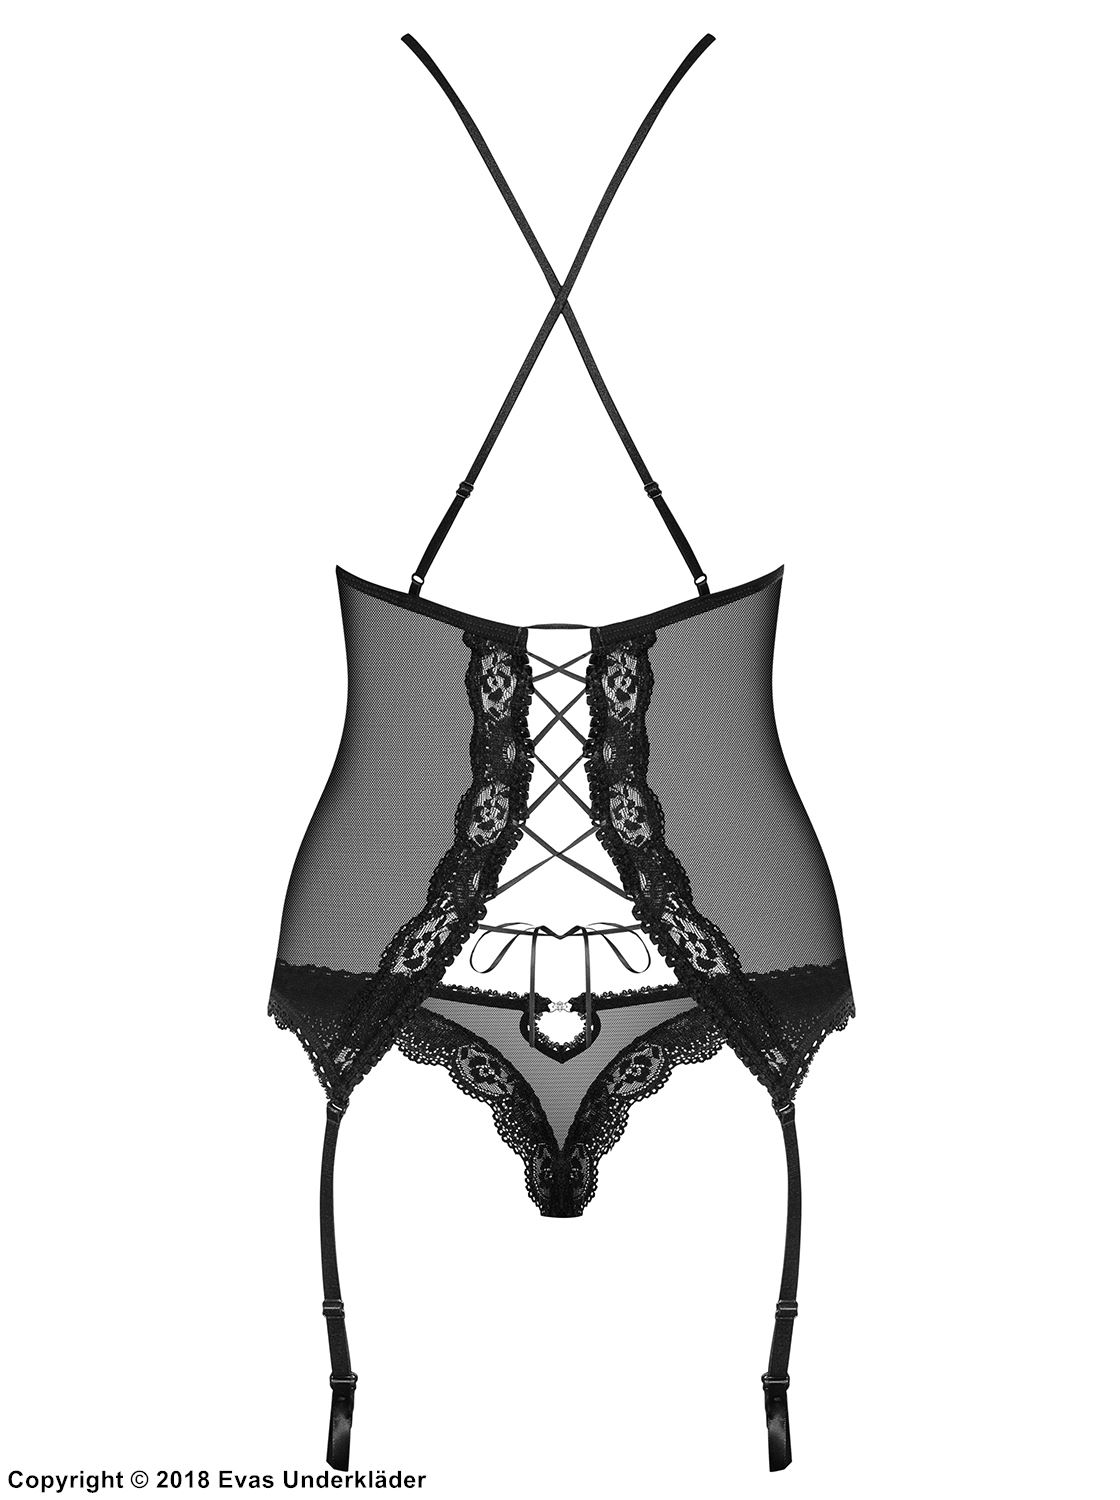 Soft bustier, sheer mesh and lace, lacing, crossing straps